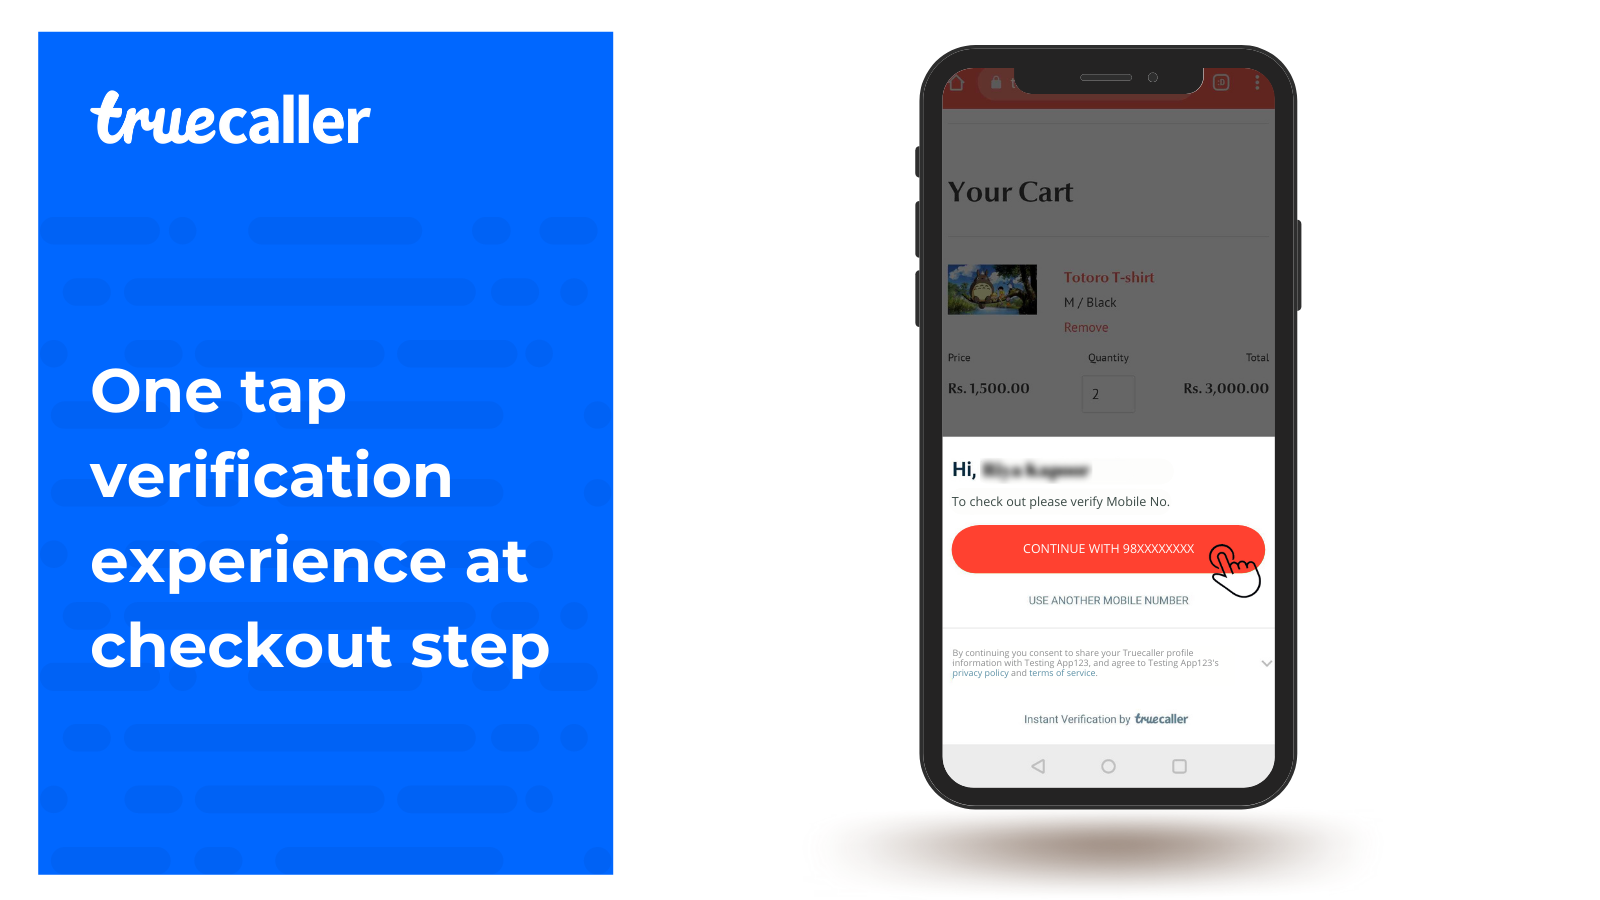 One tap verification experience at checkout step